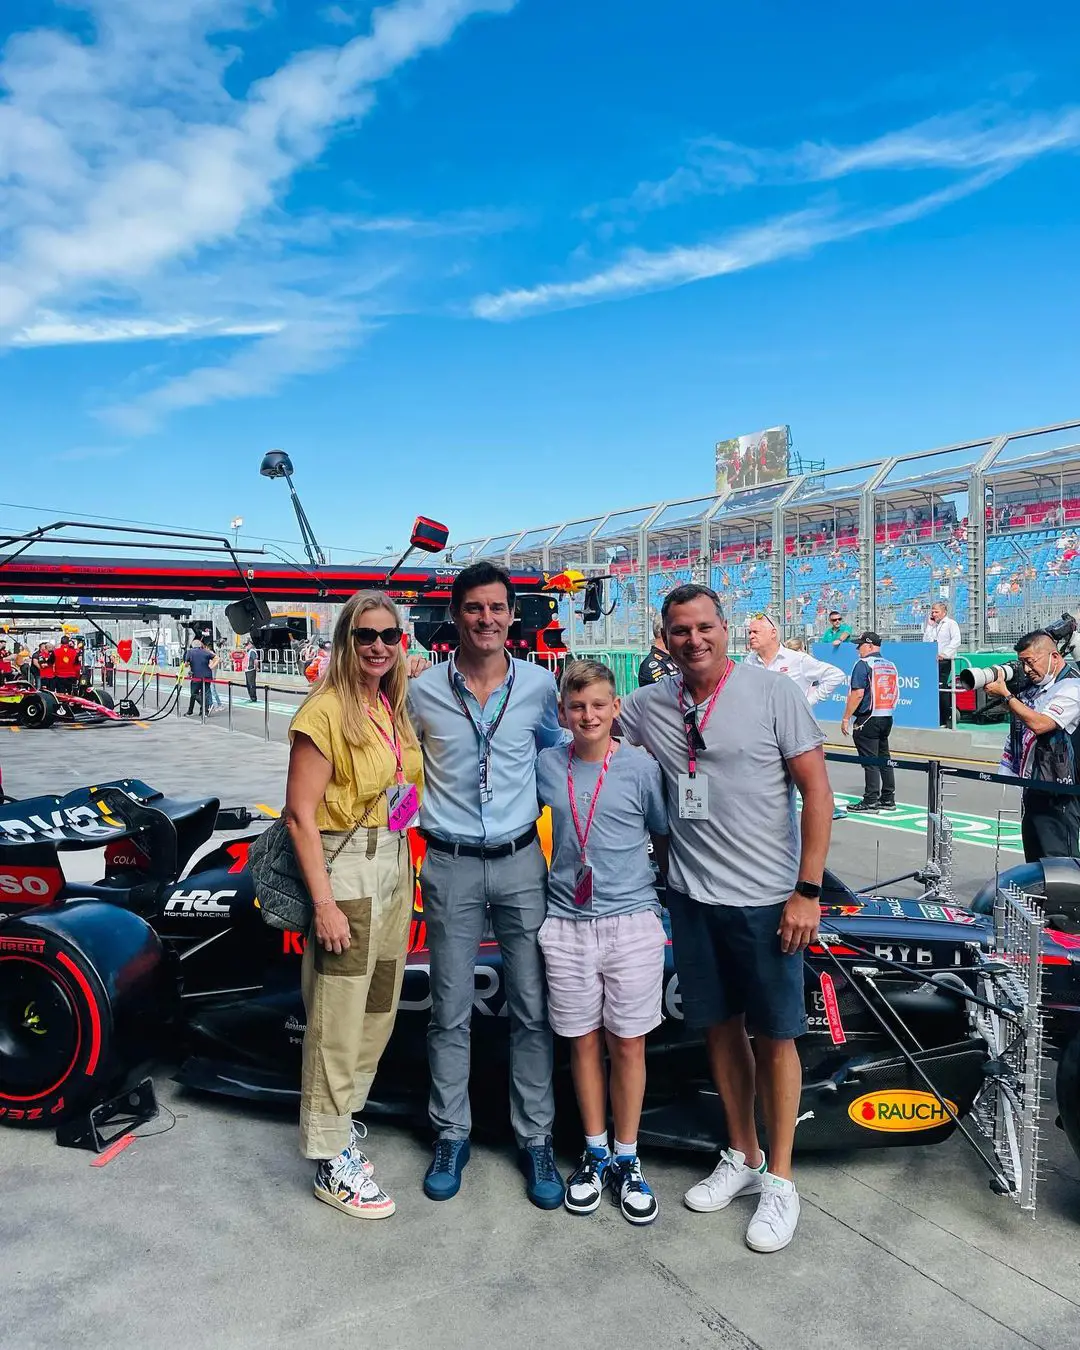 Barbara (left) with her partner Joshua (right), and their son Noah (mid-right) at Red Bull racing in Melbourne, April 2022